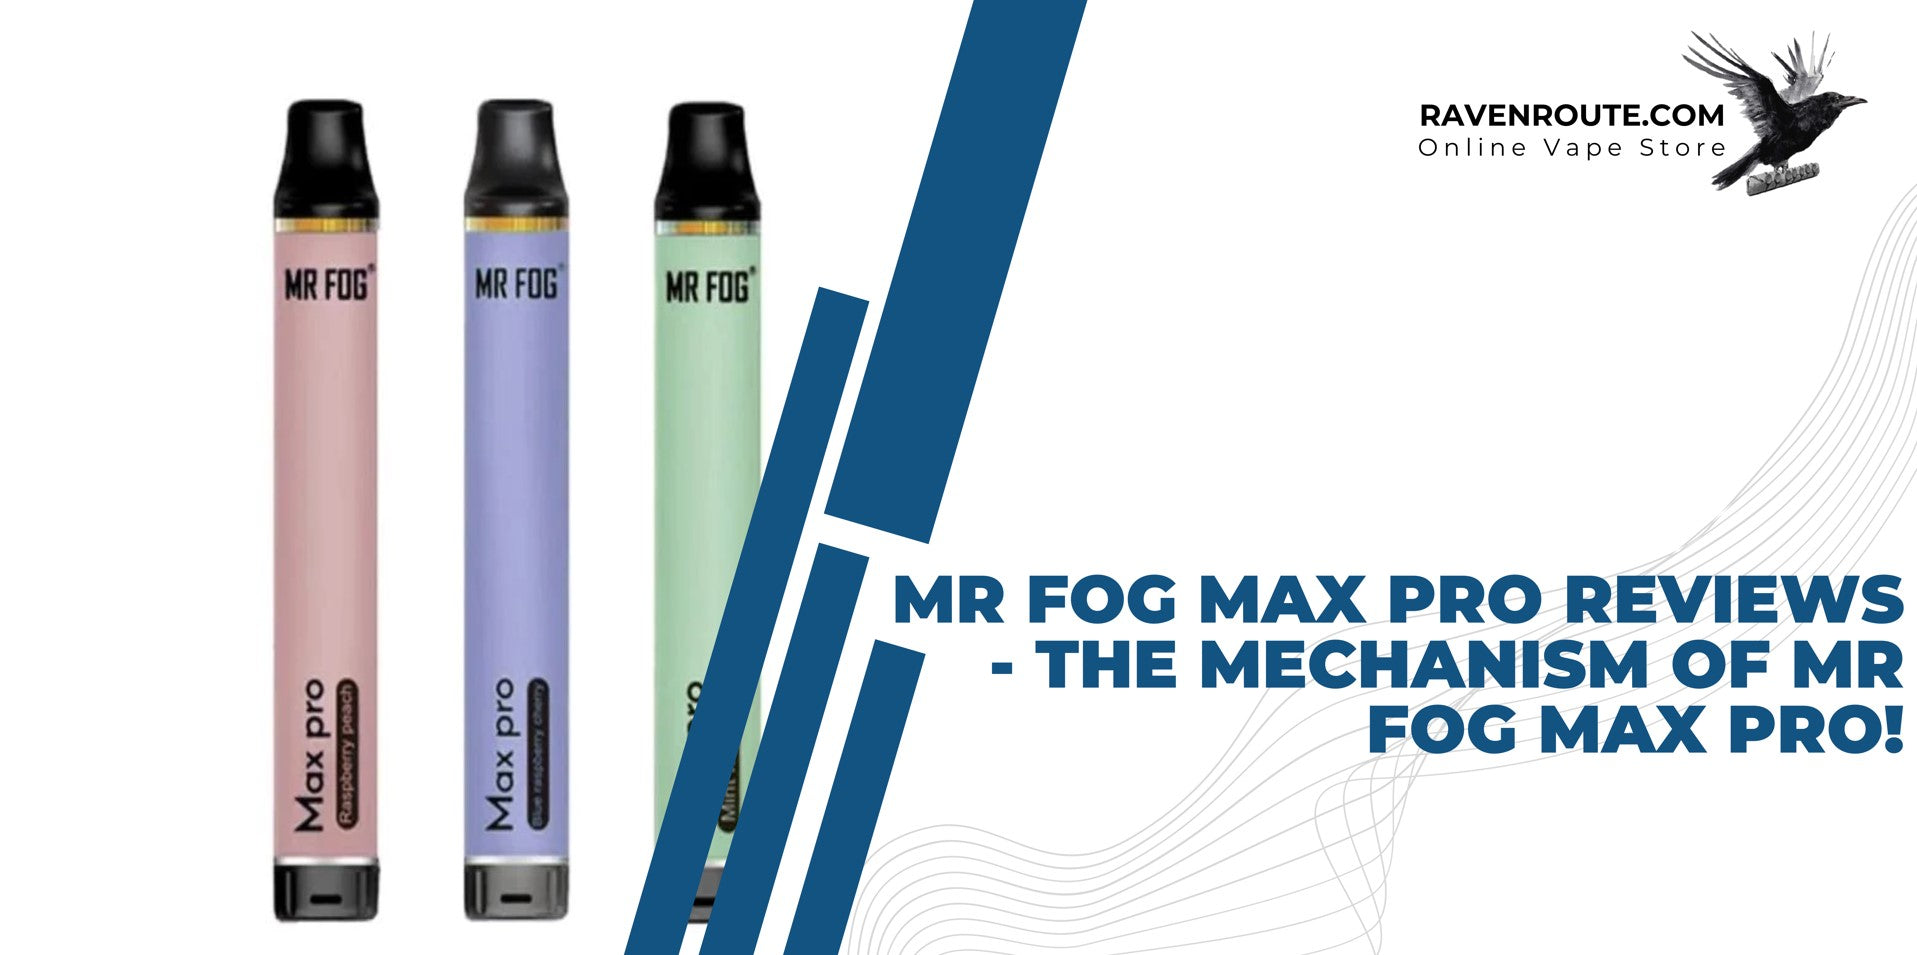 Mr Fog Max Pro Review - The Mechanism Of Mr Fog Max Pro